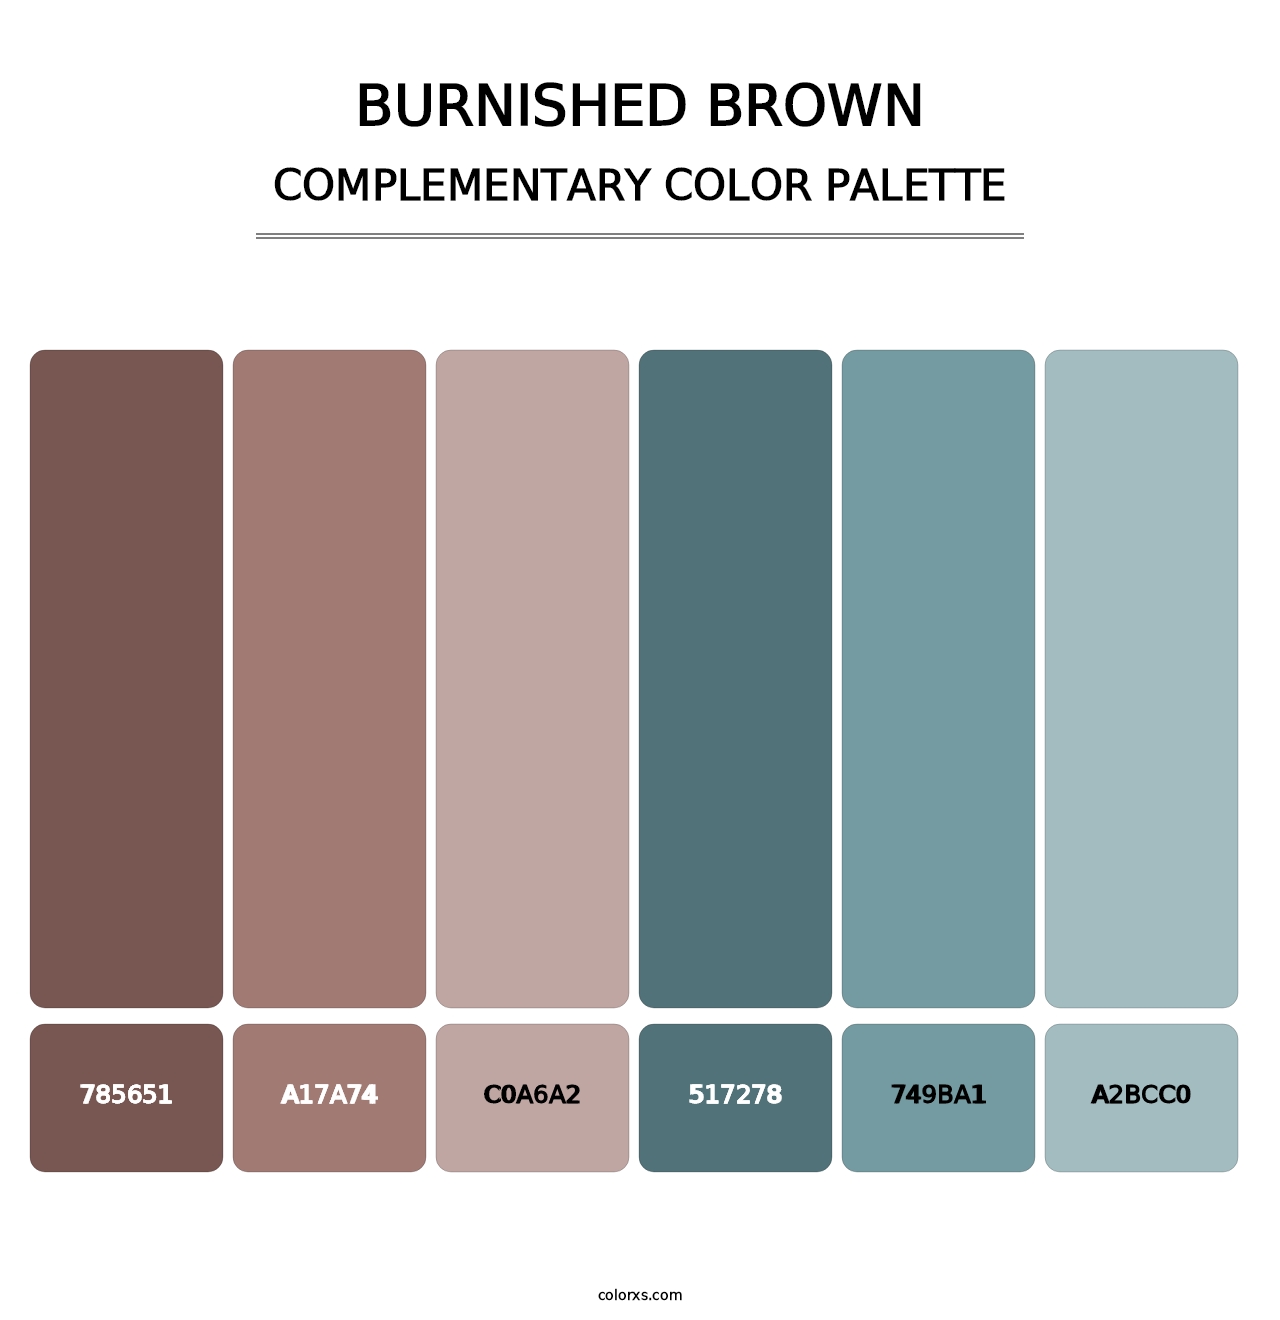 Burnished Brown - Complementary Color Palette